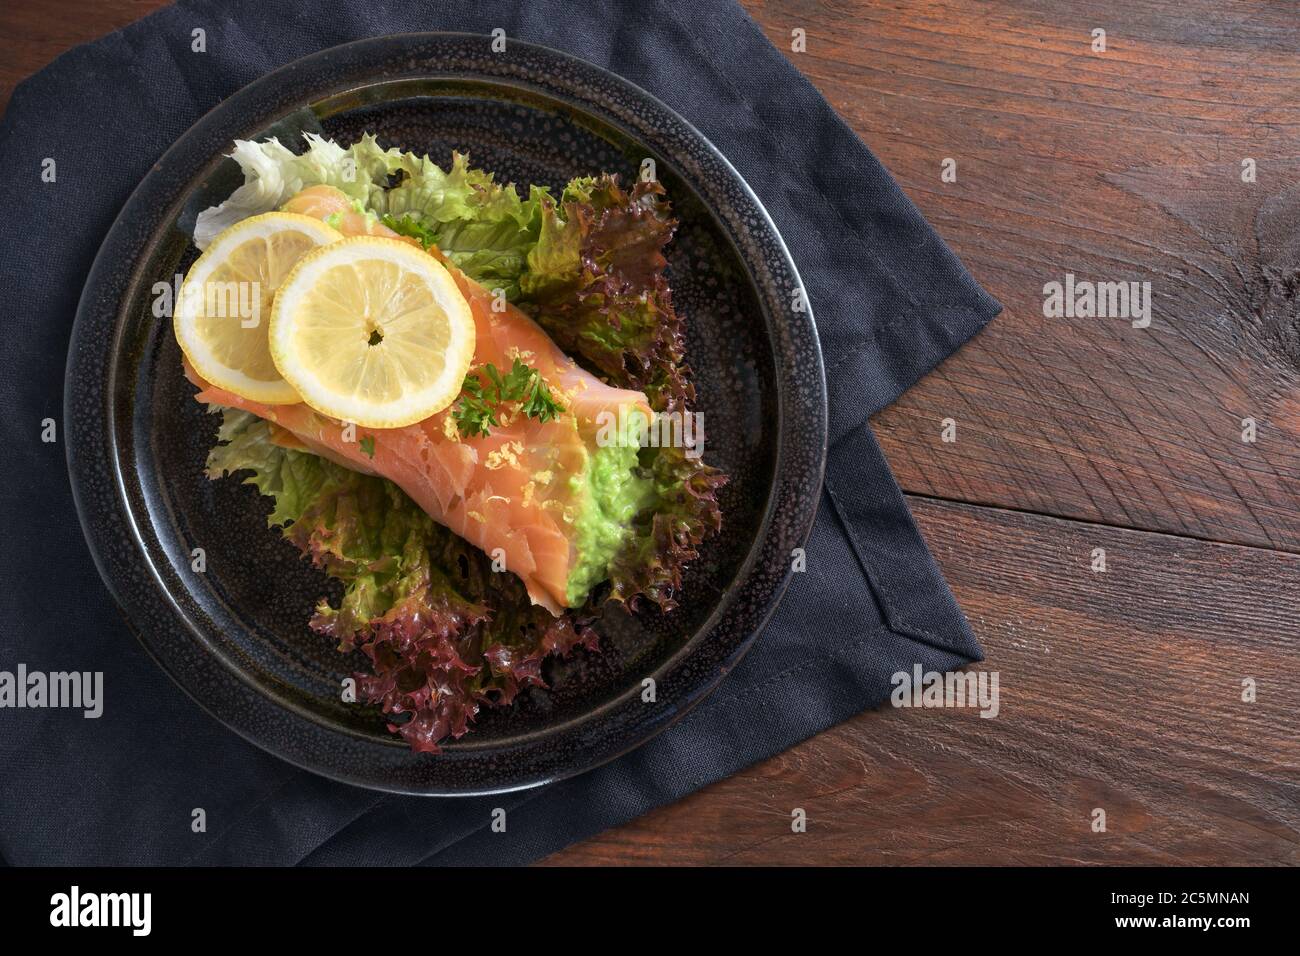 Low carb or ketogenic diet, smoked salmon roll filled with pea puree on lettuce salad with lemon slices and parsley garnish on a dark plate and napkin Stock Photo